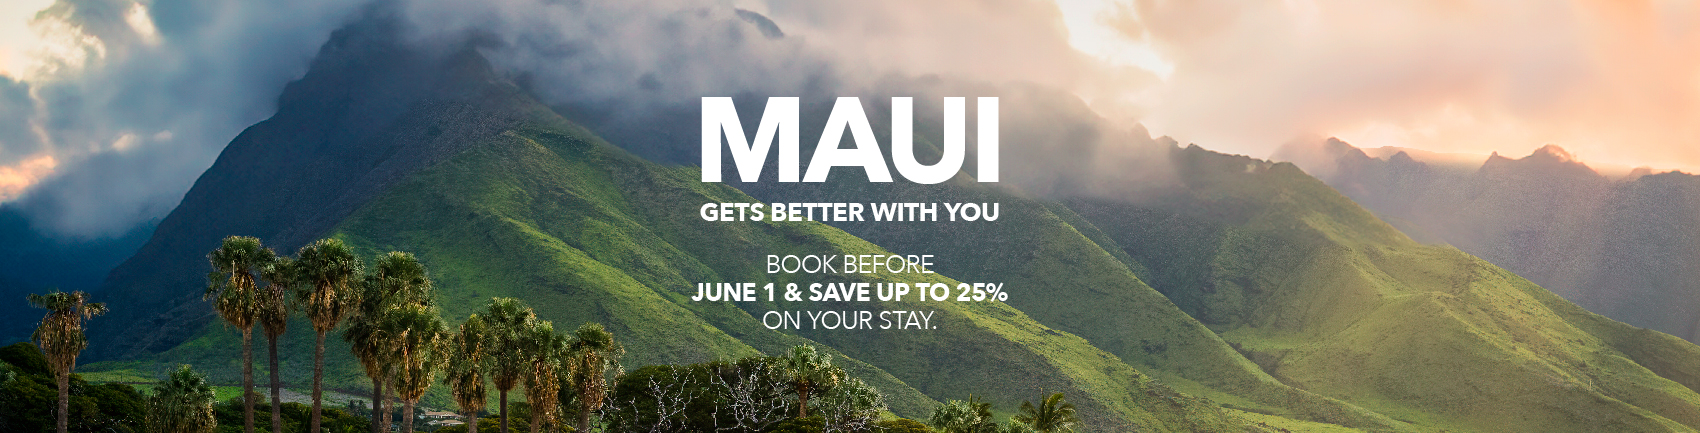 Maui Gets Better With You. Book before May 16th and save up to 25% on your stay.